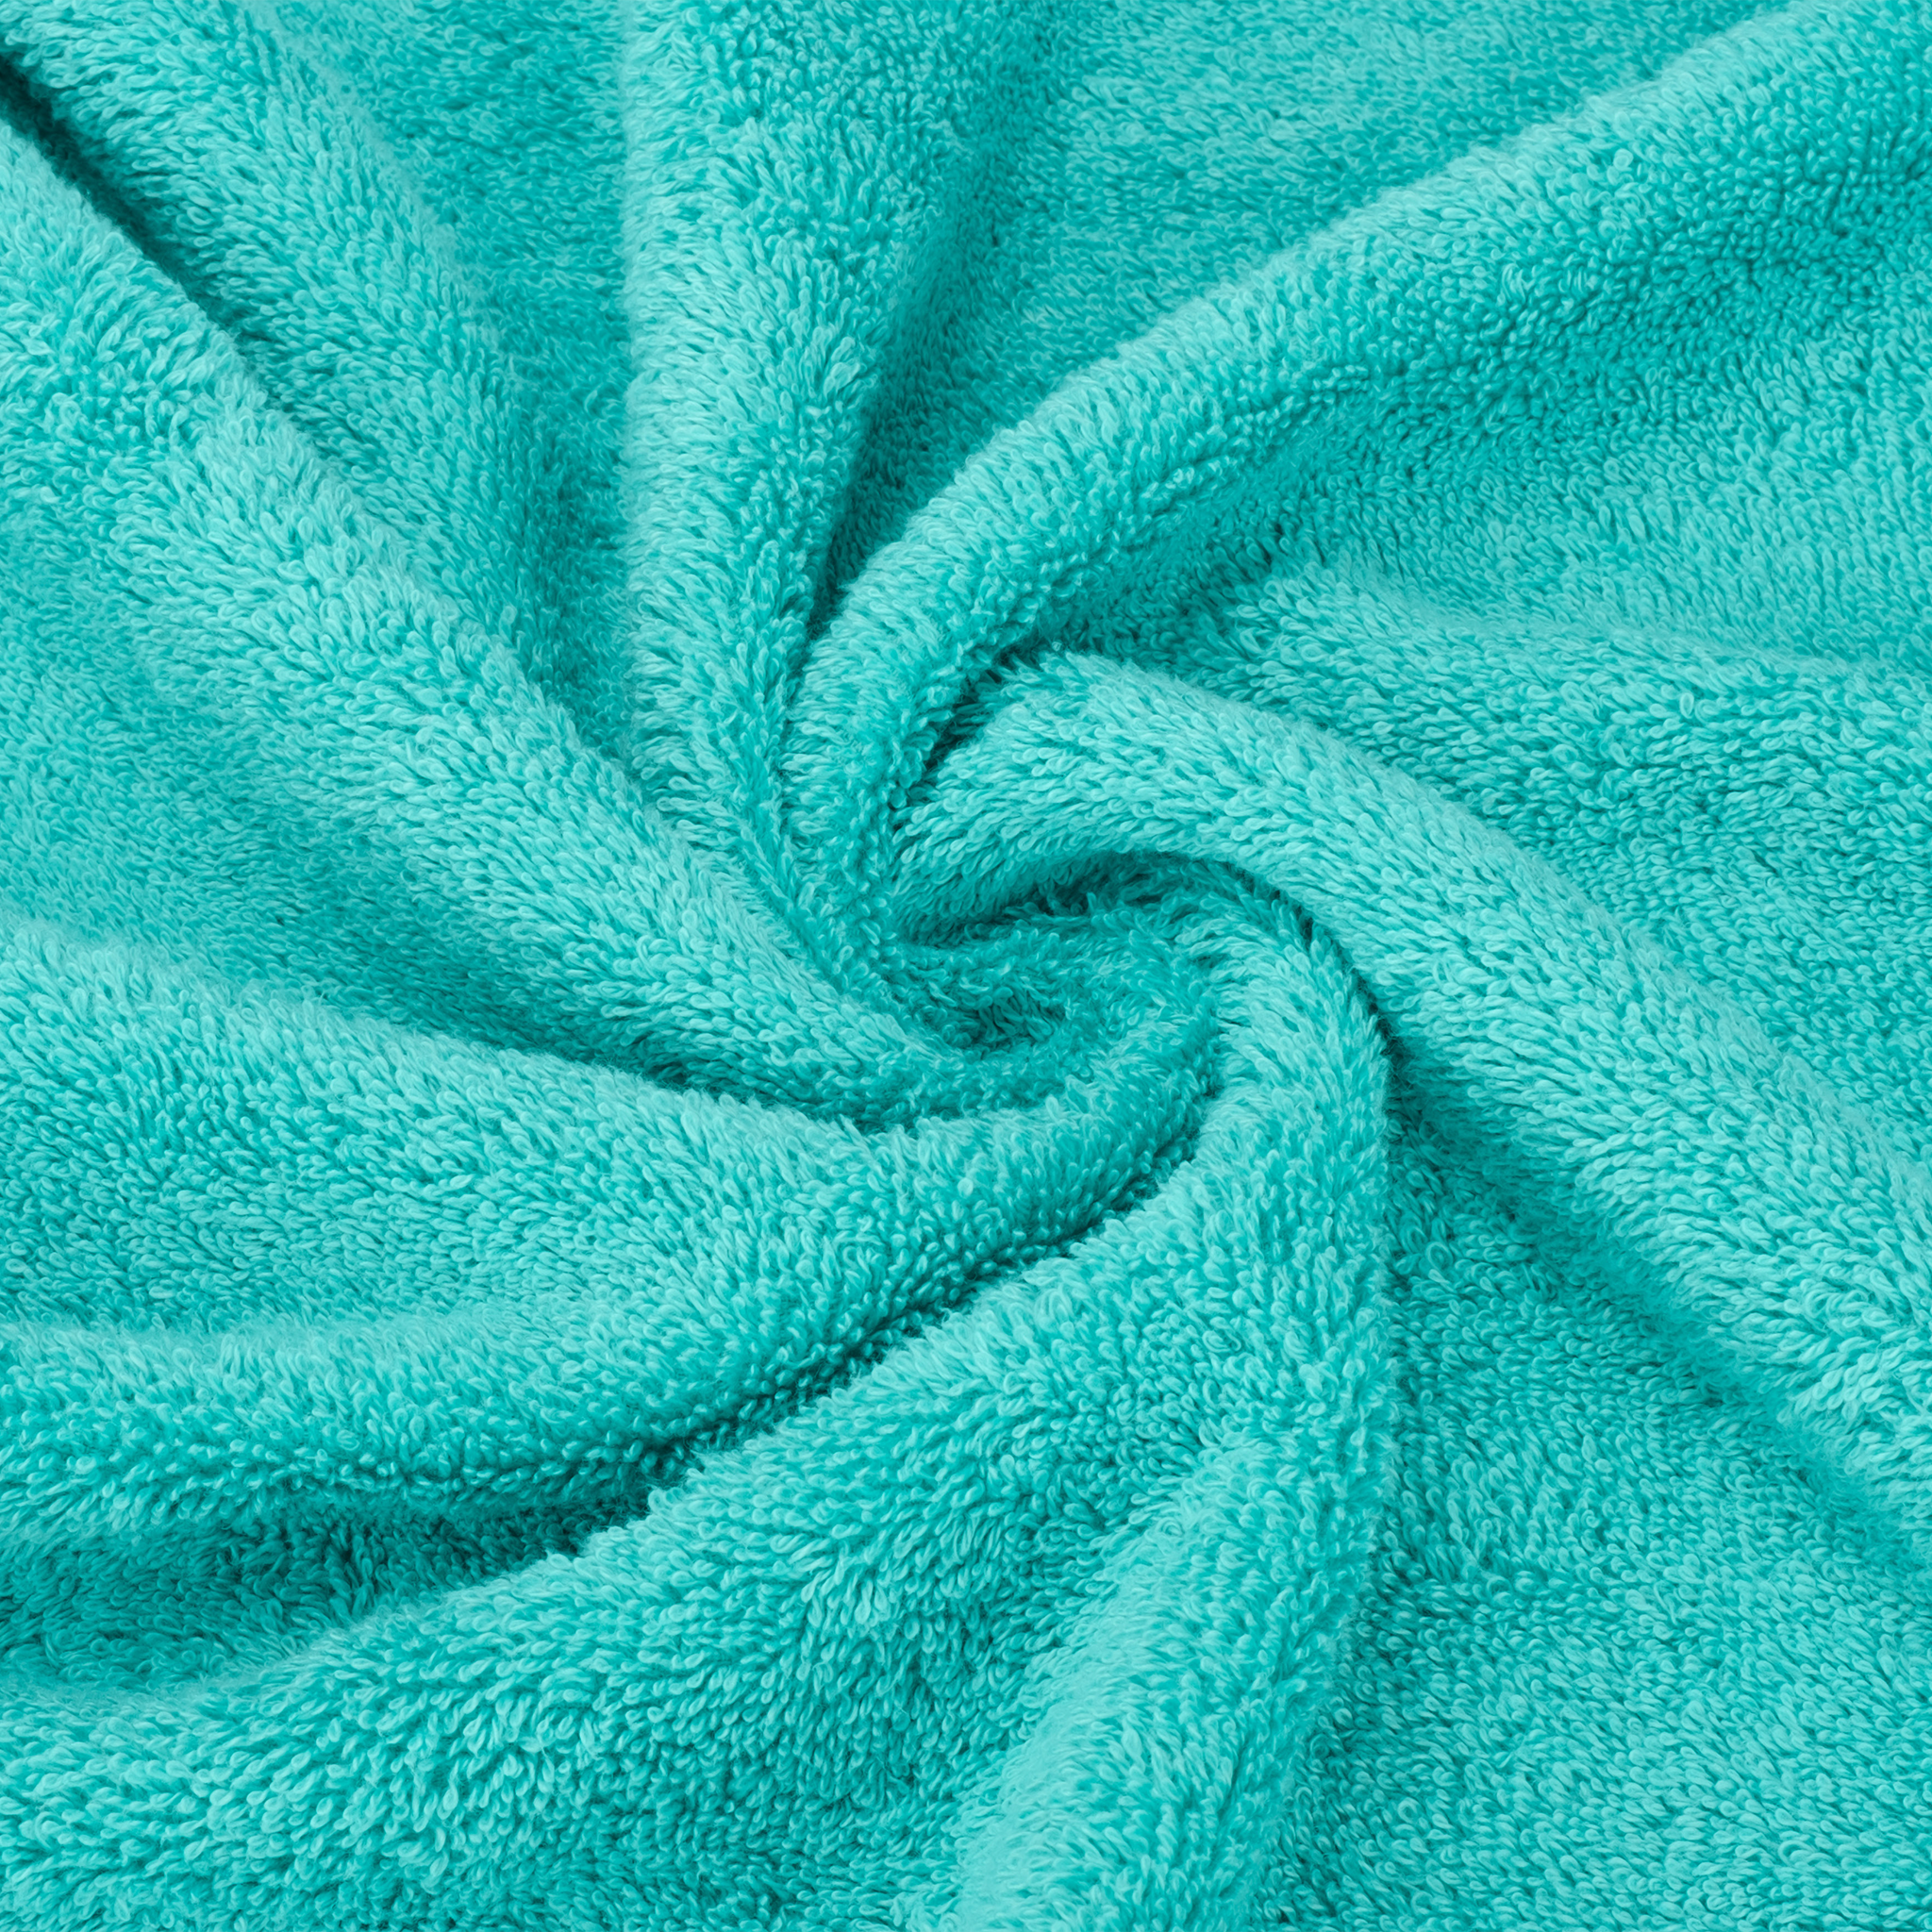 American Soft Linen - Single Piece Turkish Cotton Washcloth Towels - Turquoise-Blue - 5